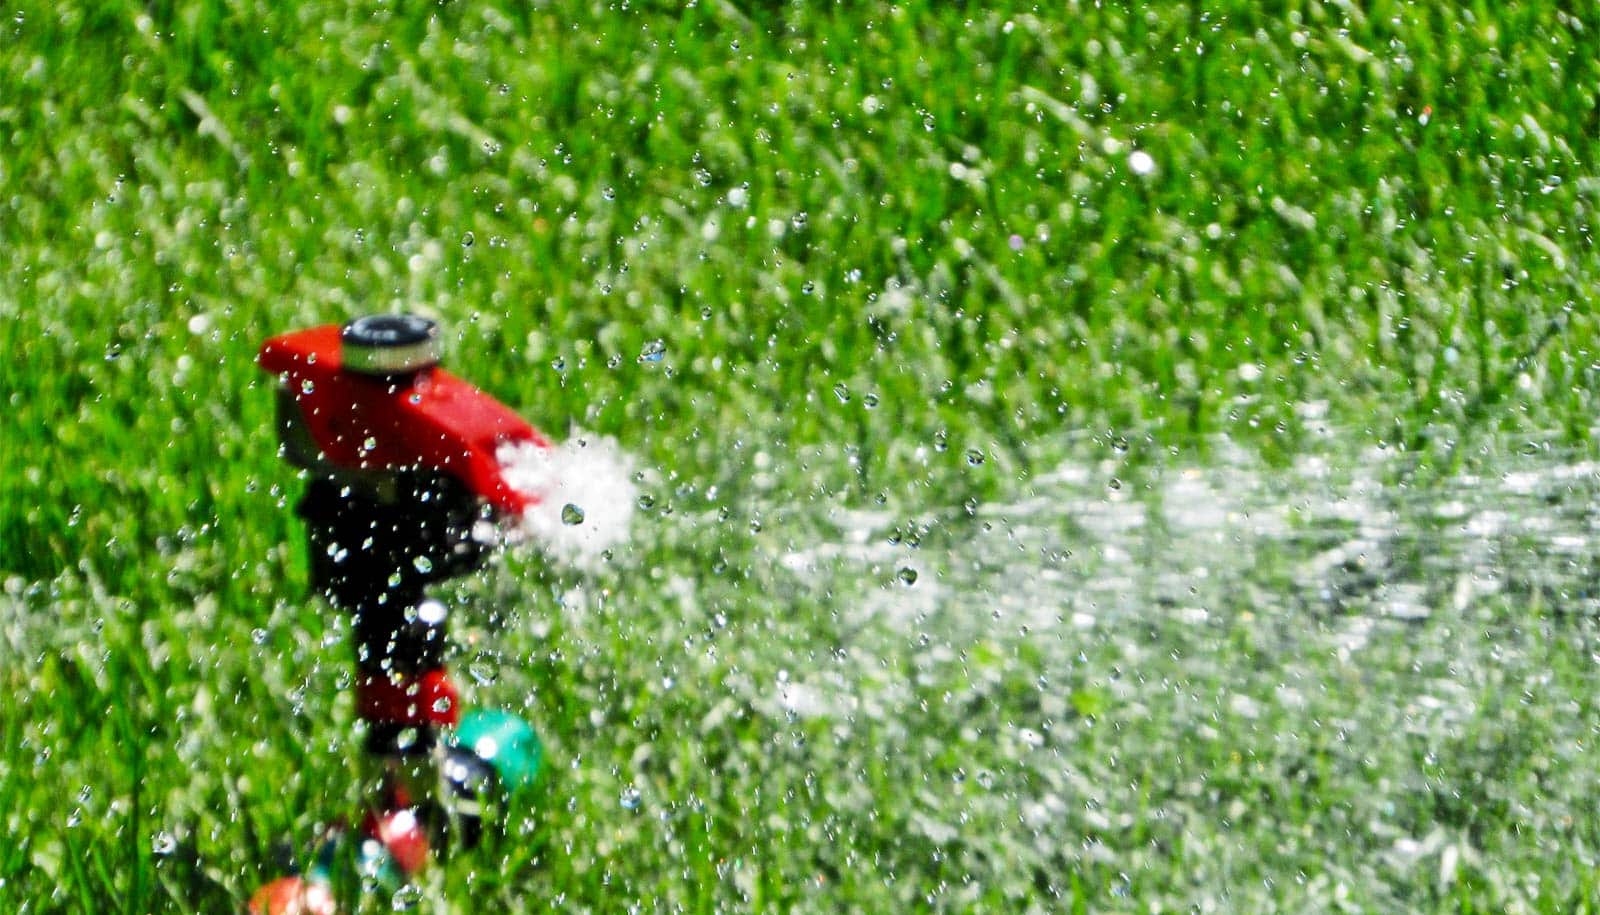 How neighbors can nudge you to skip the sprinkler - Futurity: Research News